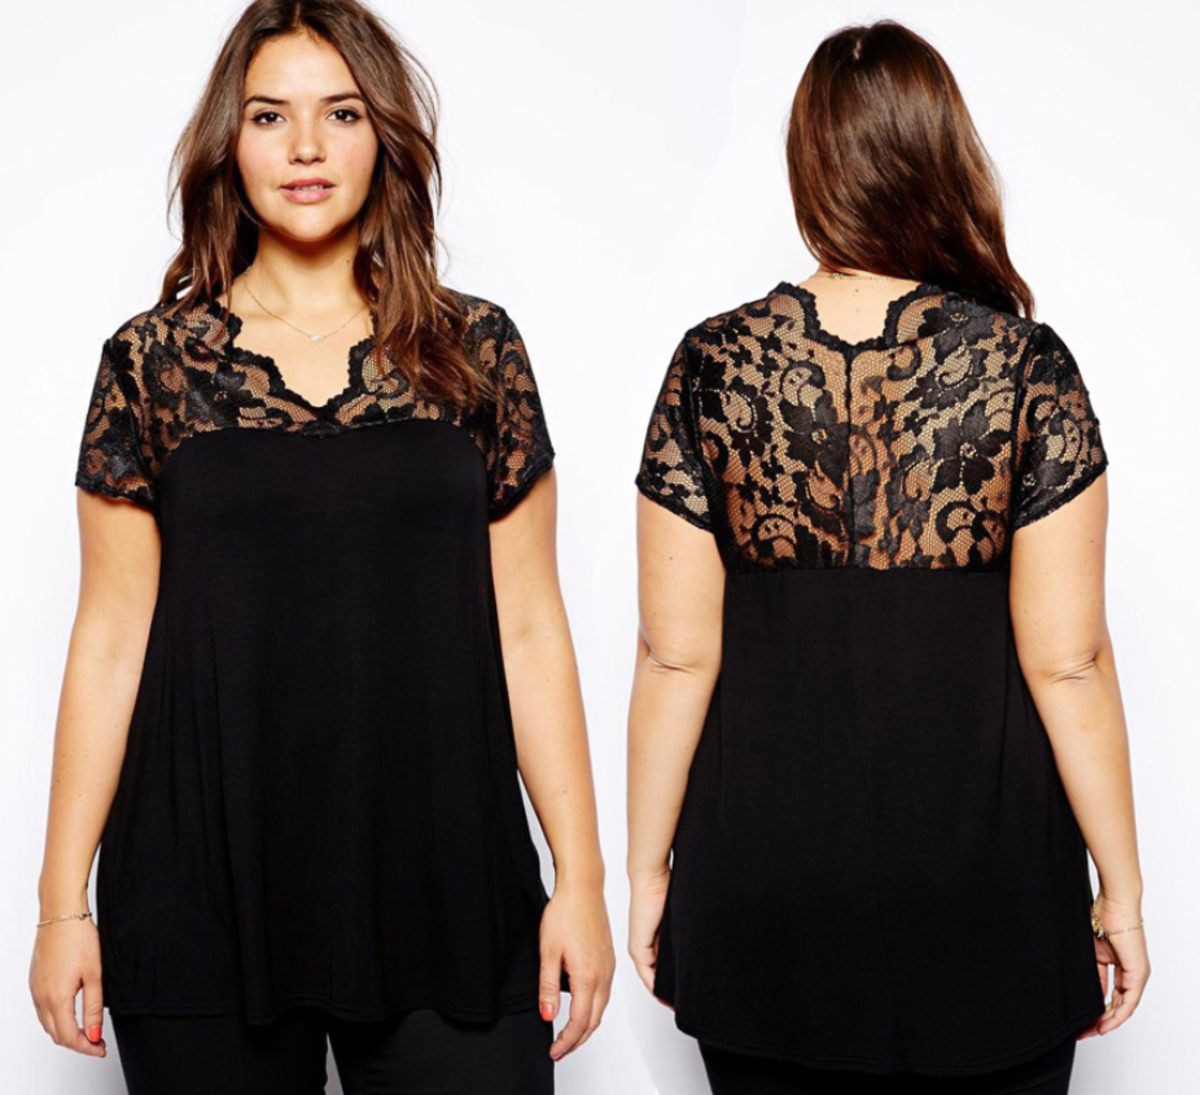 Blouse with lace yoke and sleeves. Wear with a black skirt or pants for an elegant look.